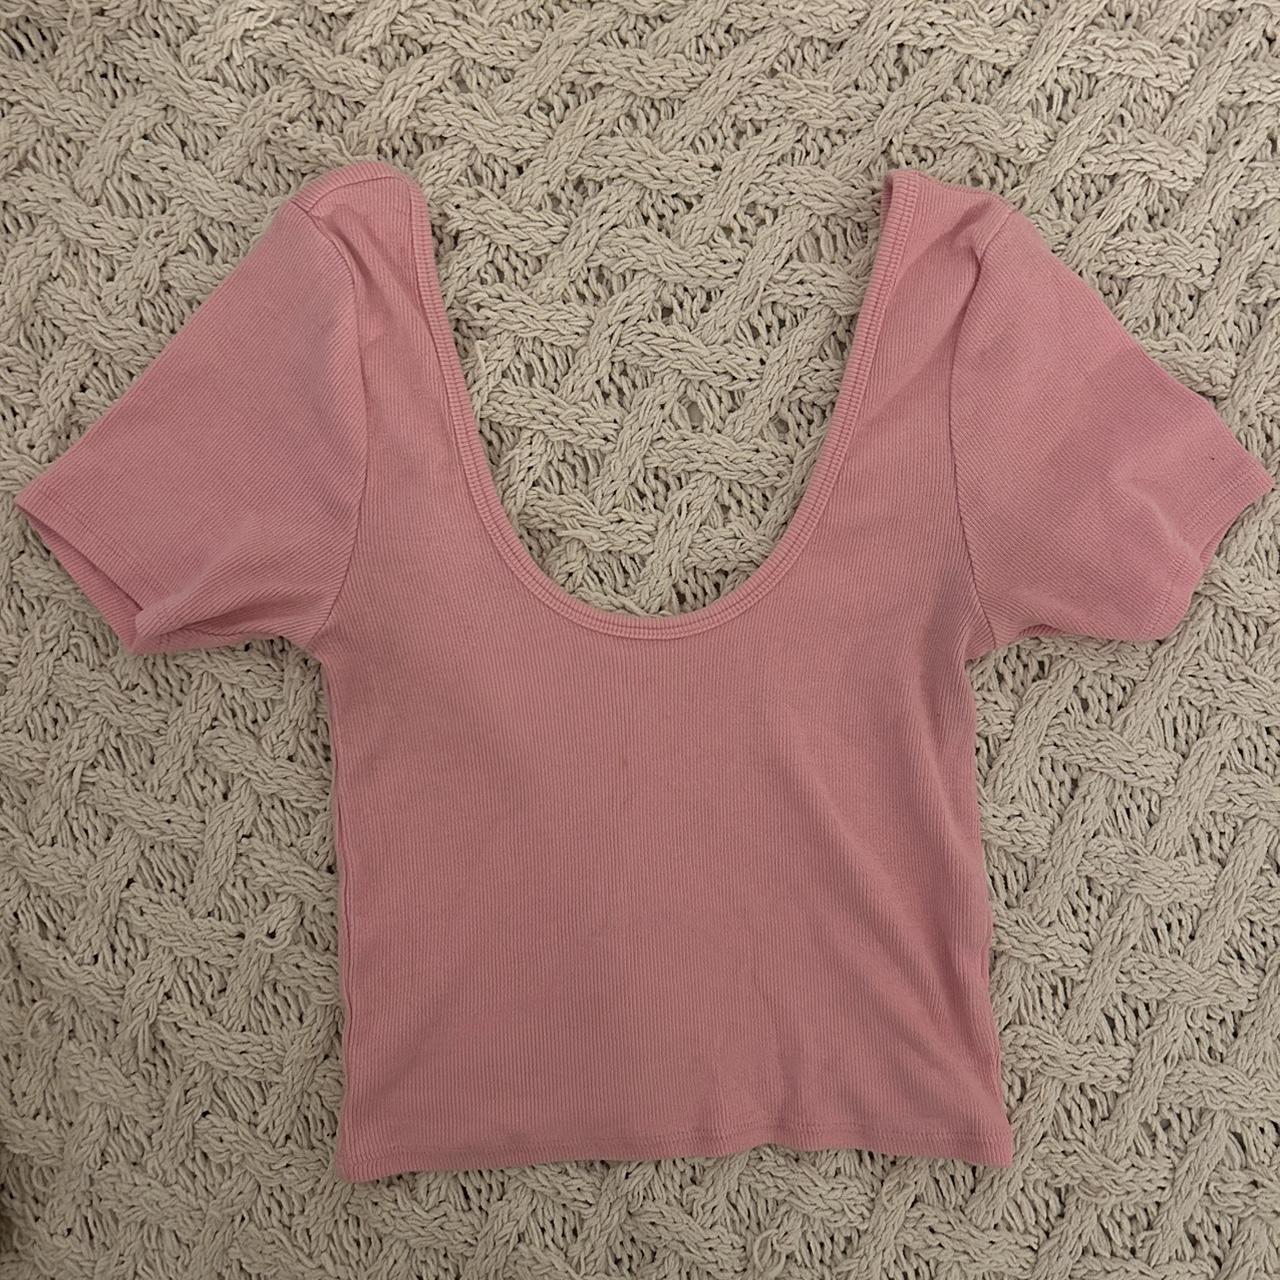 PacSun Women's Pink and Blue Crop-top (3)